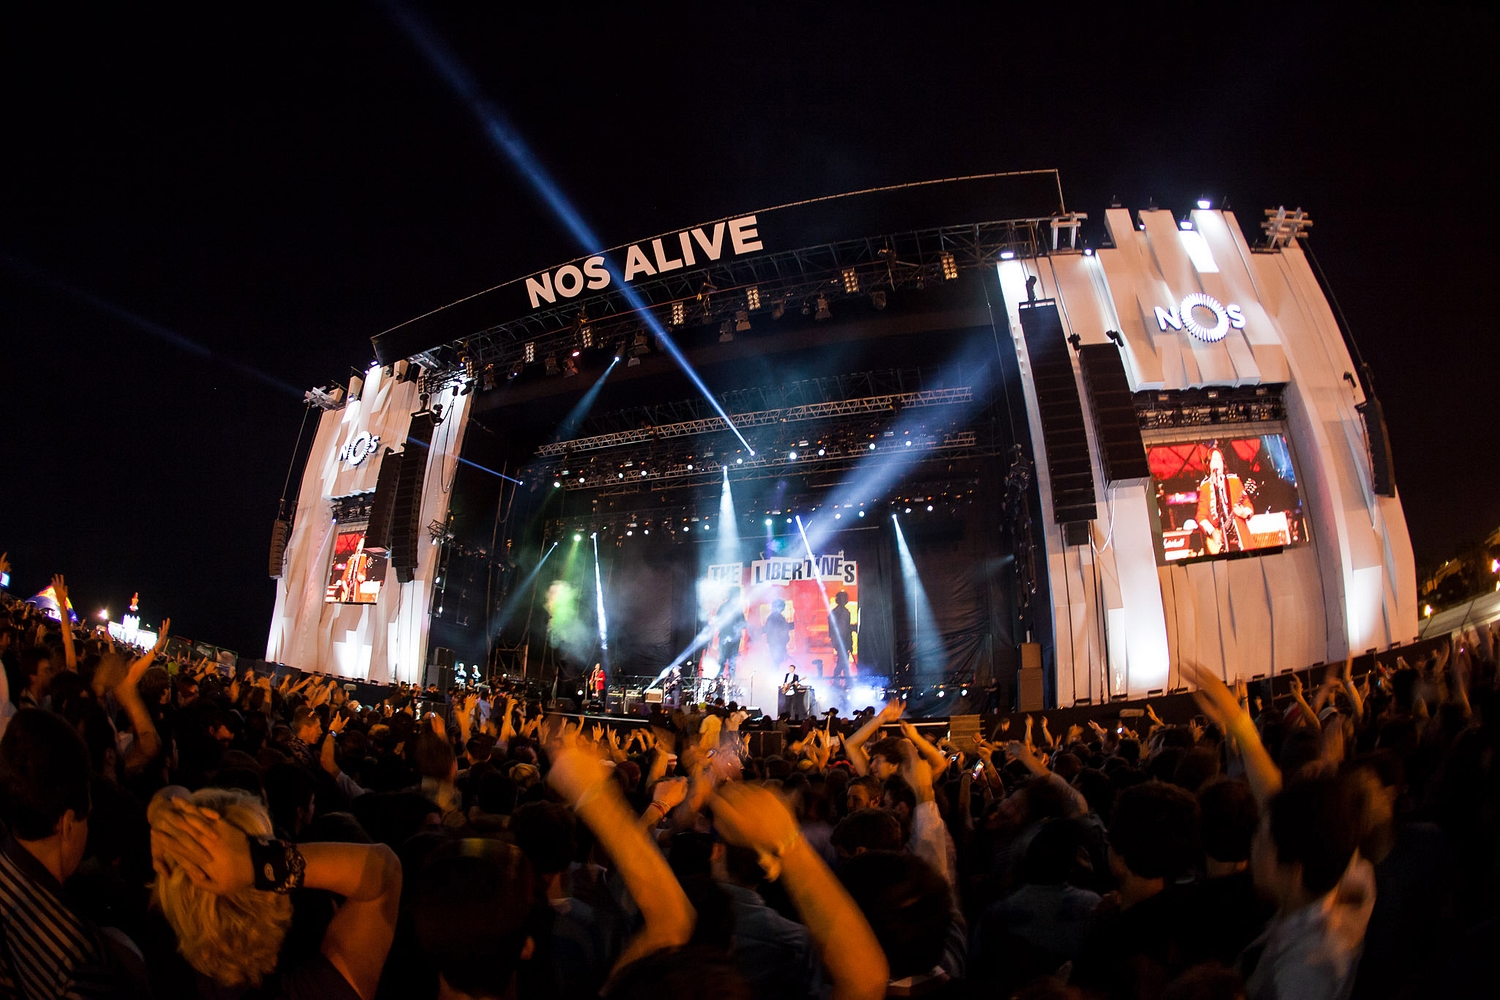 Metronomy confirmed for Nos Alive 2015